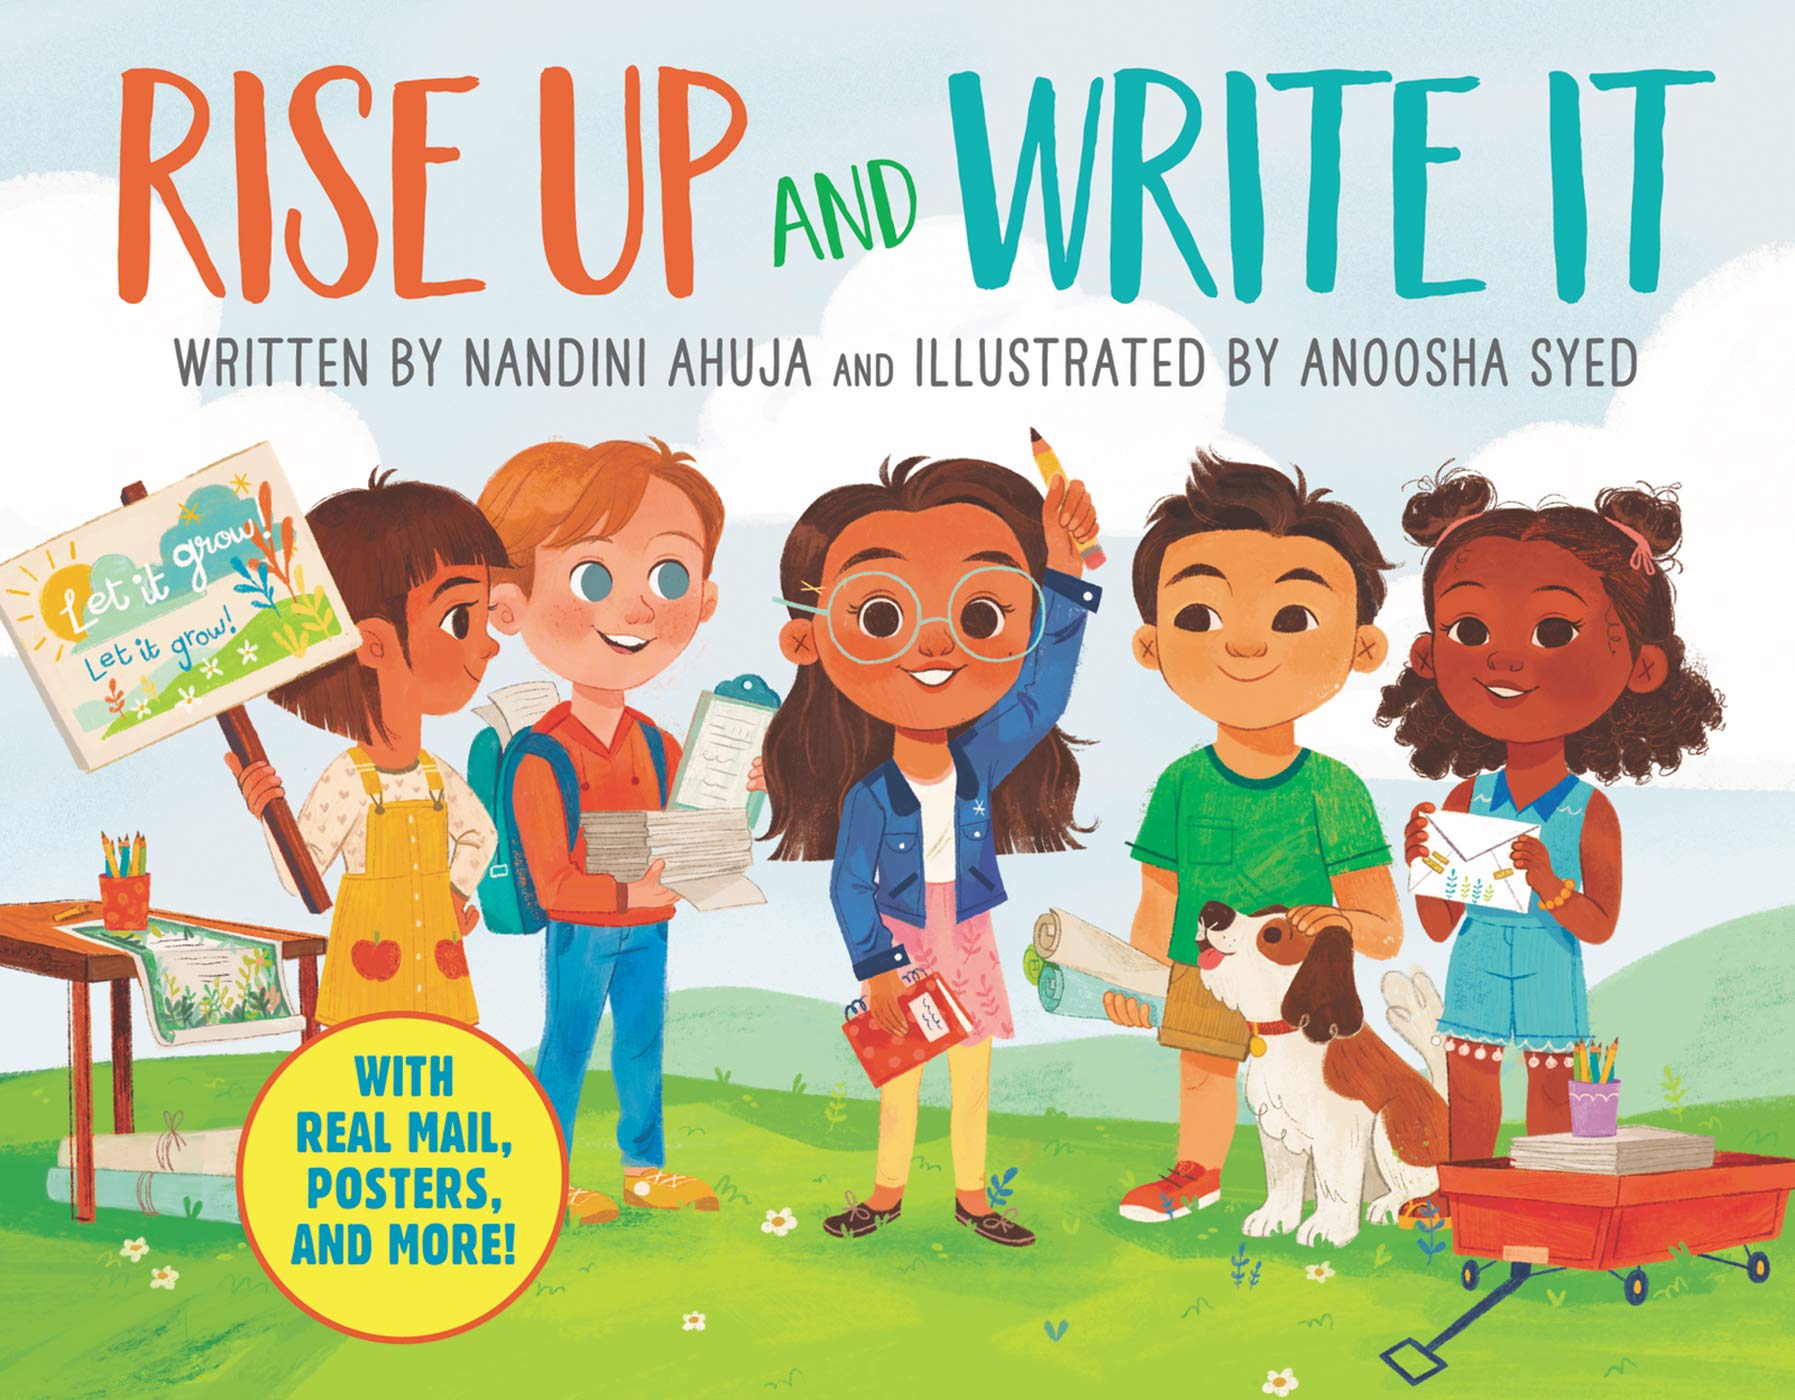 Book cover - Rise Up and Write It written by Nandini Ahuja and illustrated by Anoosha Syed